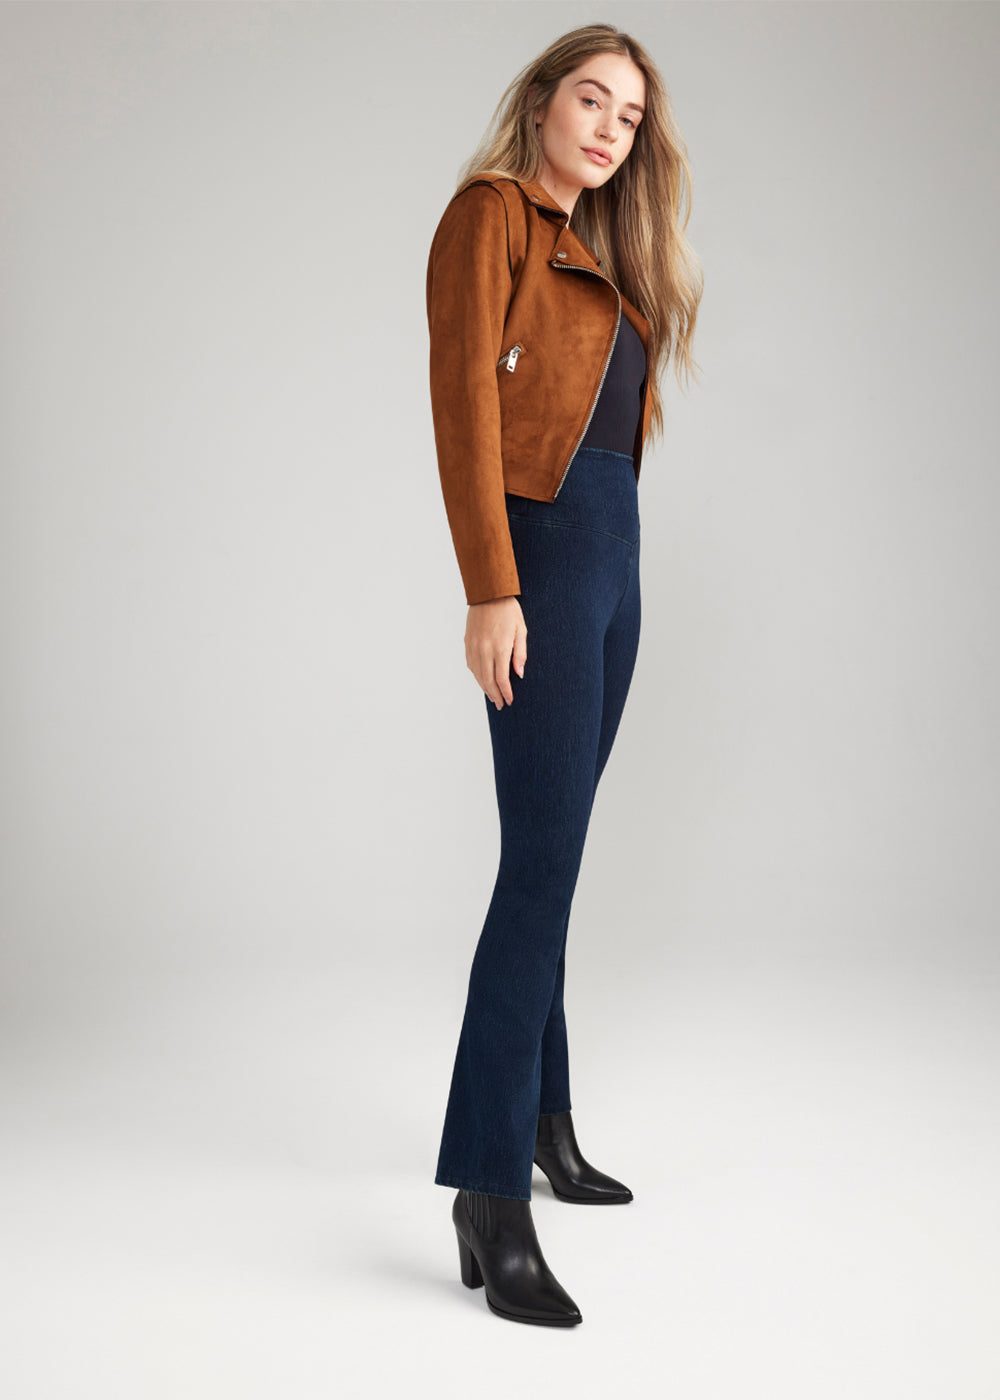 denim bootcut shaping legging in True Indigo, Black top and Suede jacket in Dark Camel worn by a woman standing sideways with arm at side Yummie